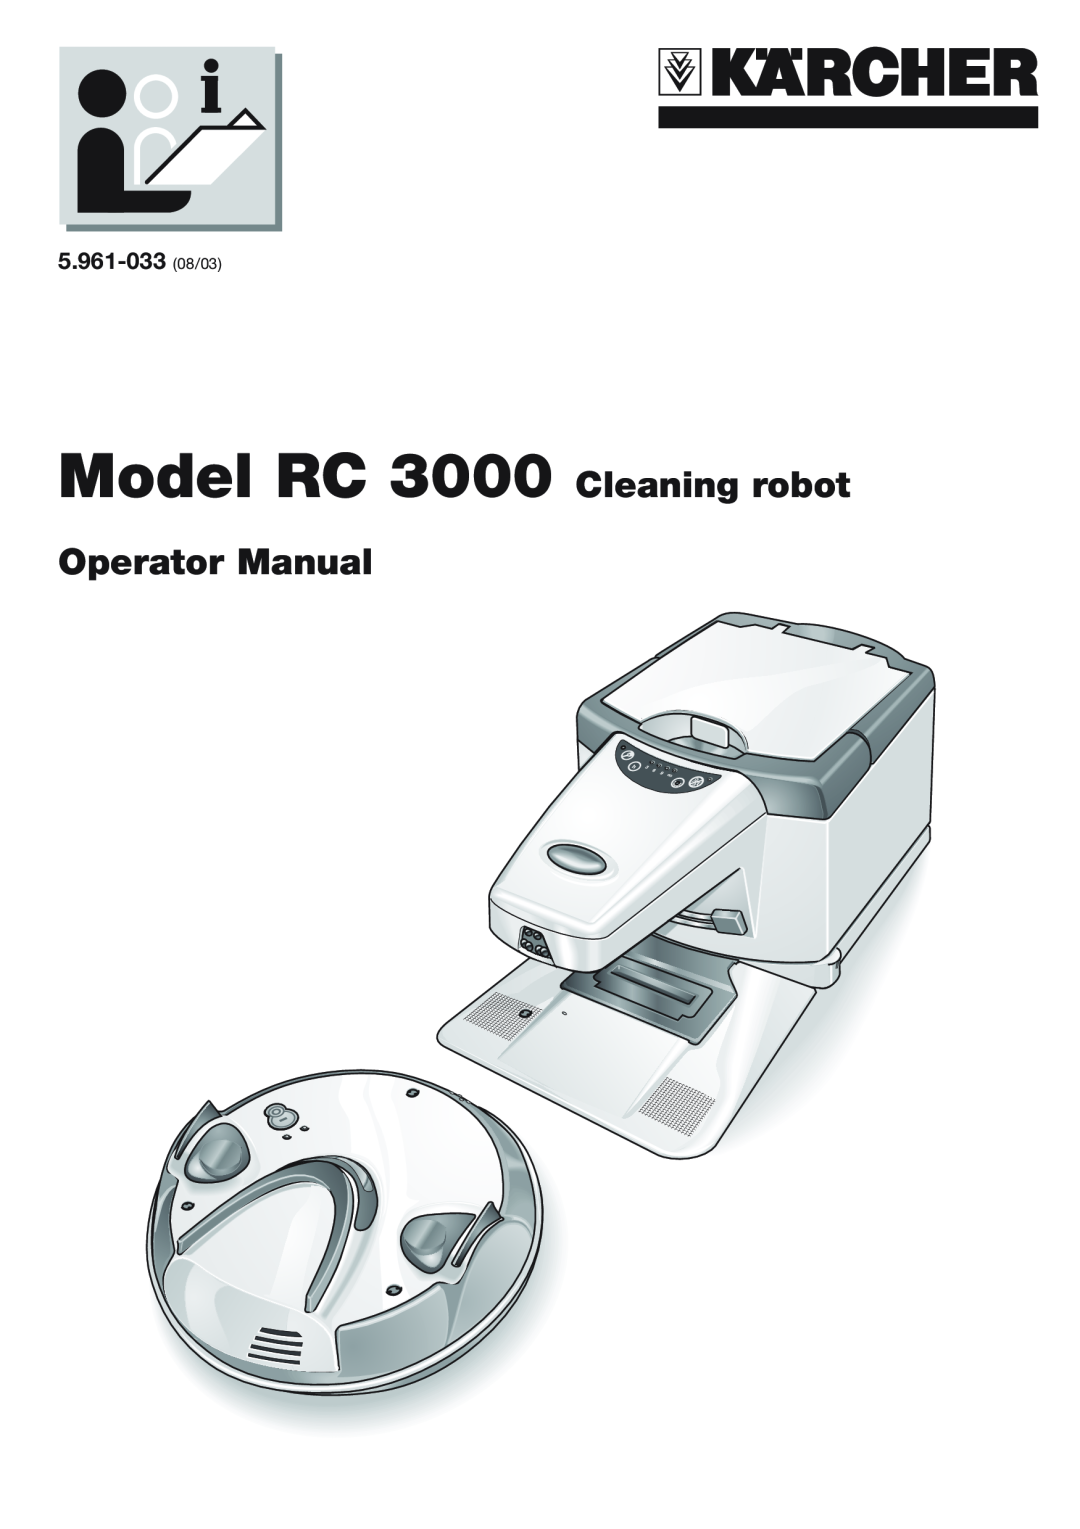 Karcher manual Model RC 3000 Cleaning robot, Operator Manual, 5.961-033 08/03 